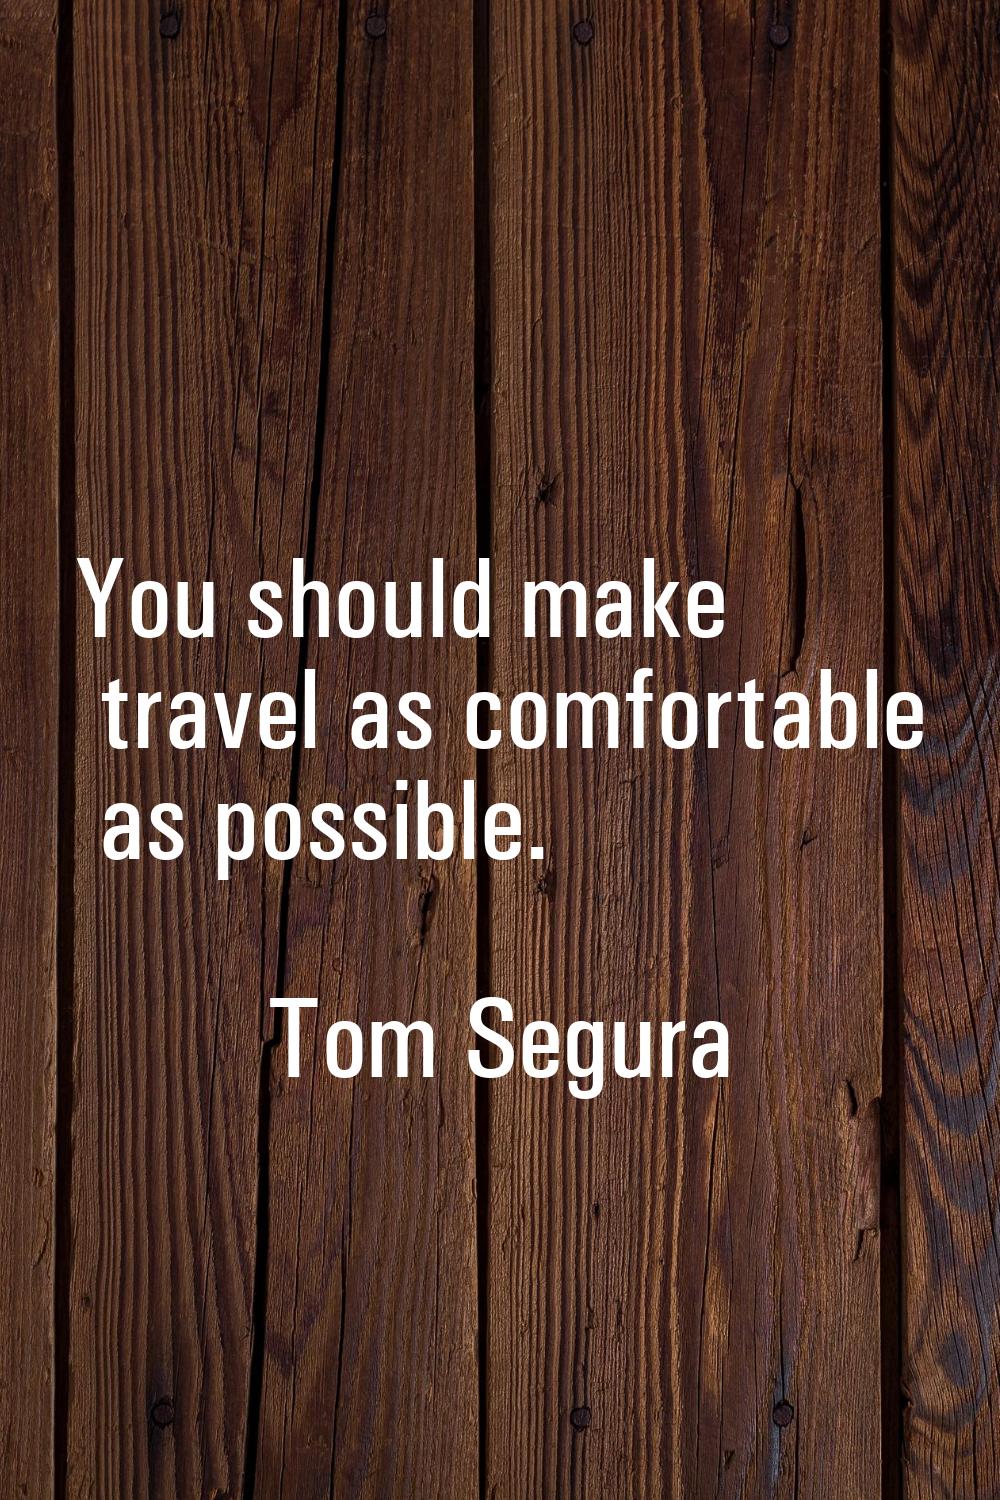 You should make travel as comfortable as possible.